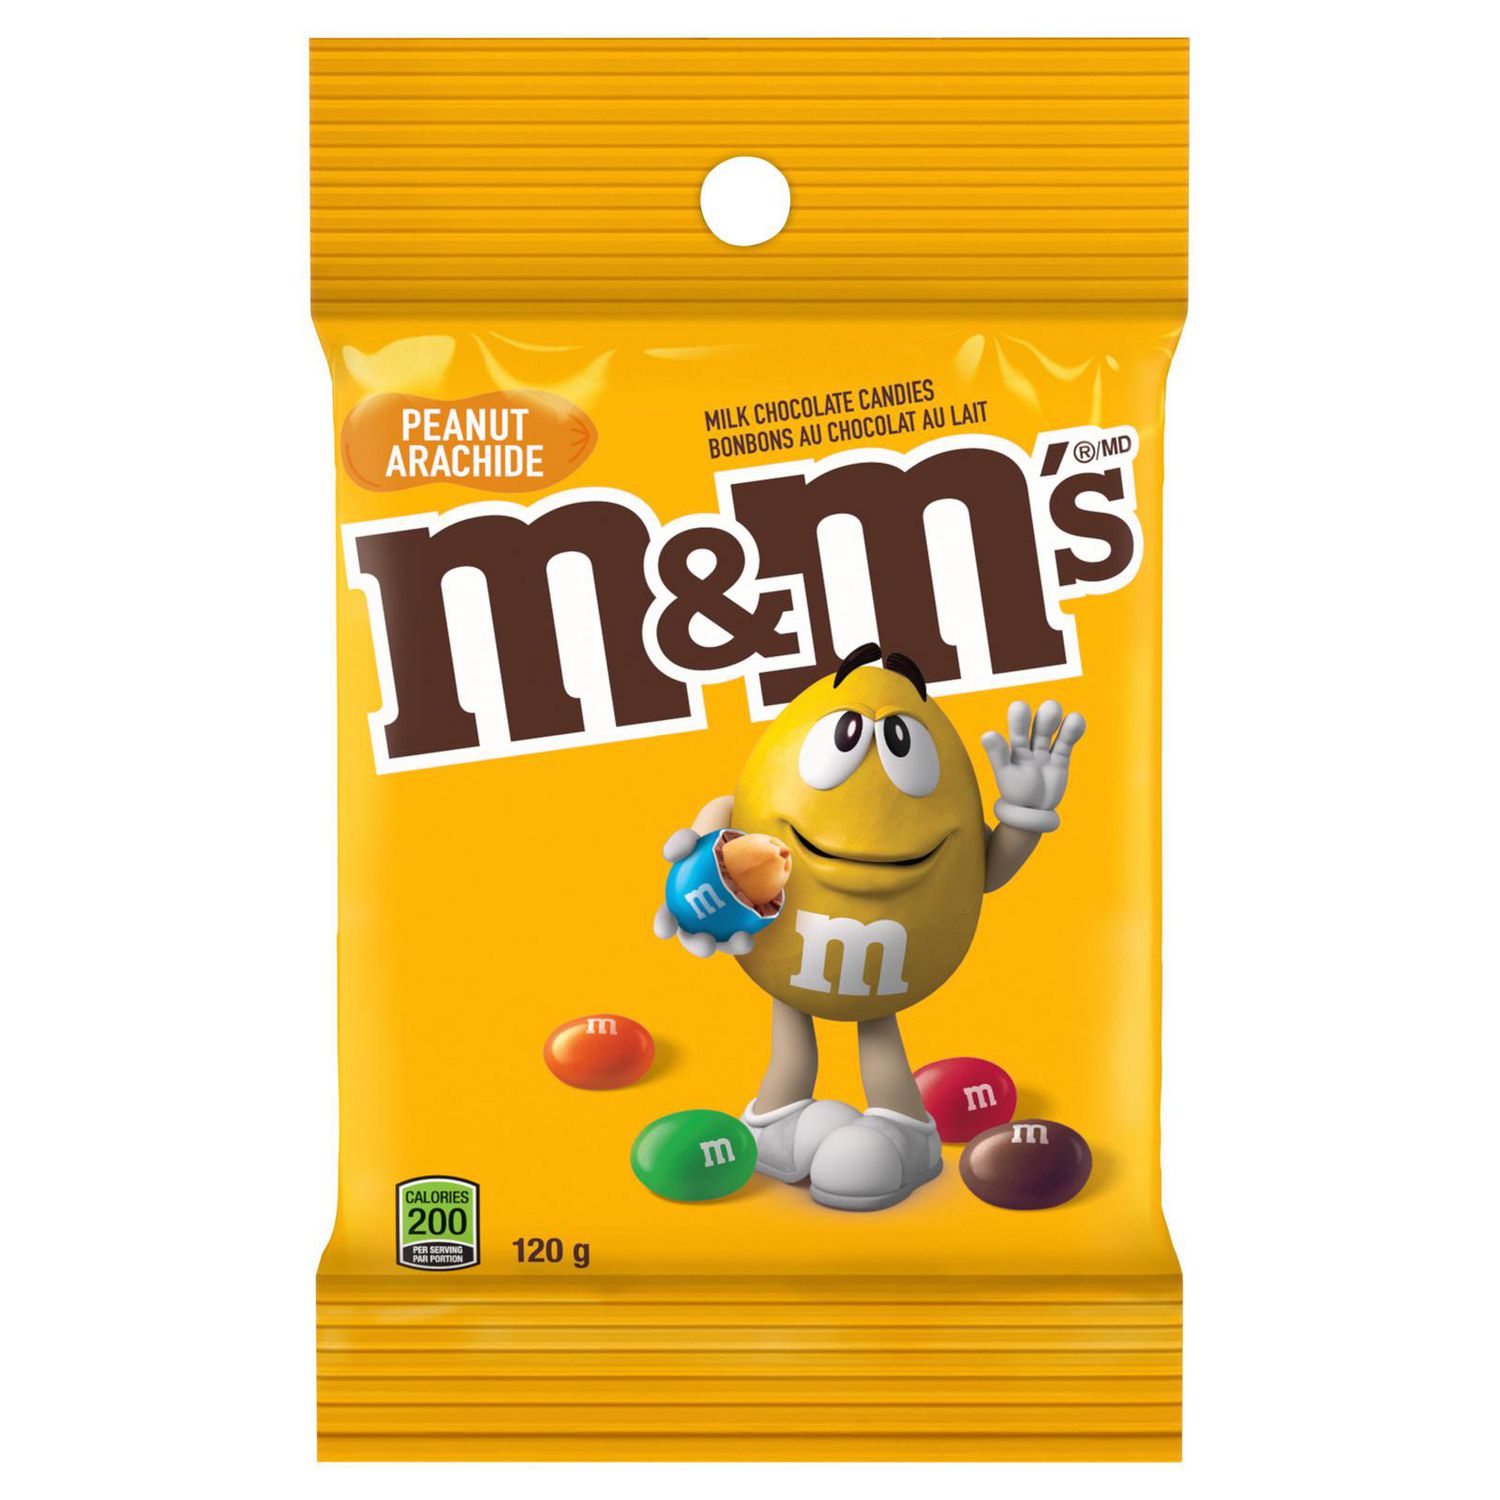 5 Foot Long Hand-Painted Peanut M&Ms Pop Art Bag For Sale at